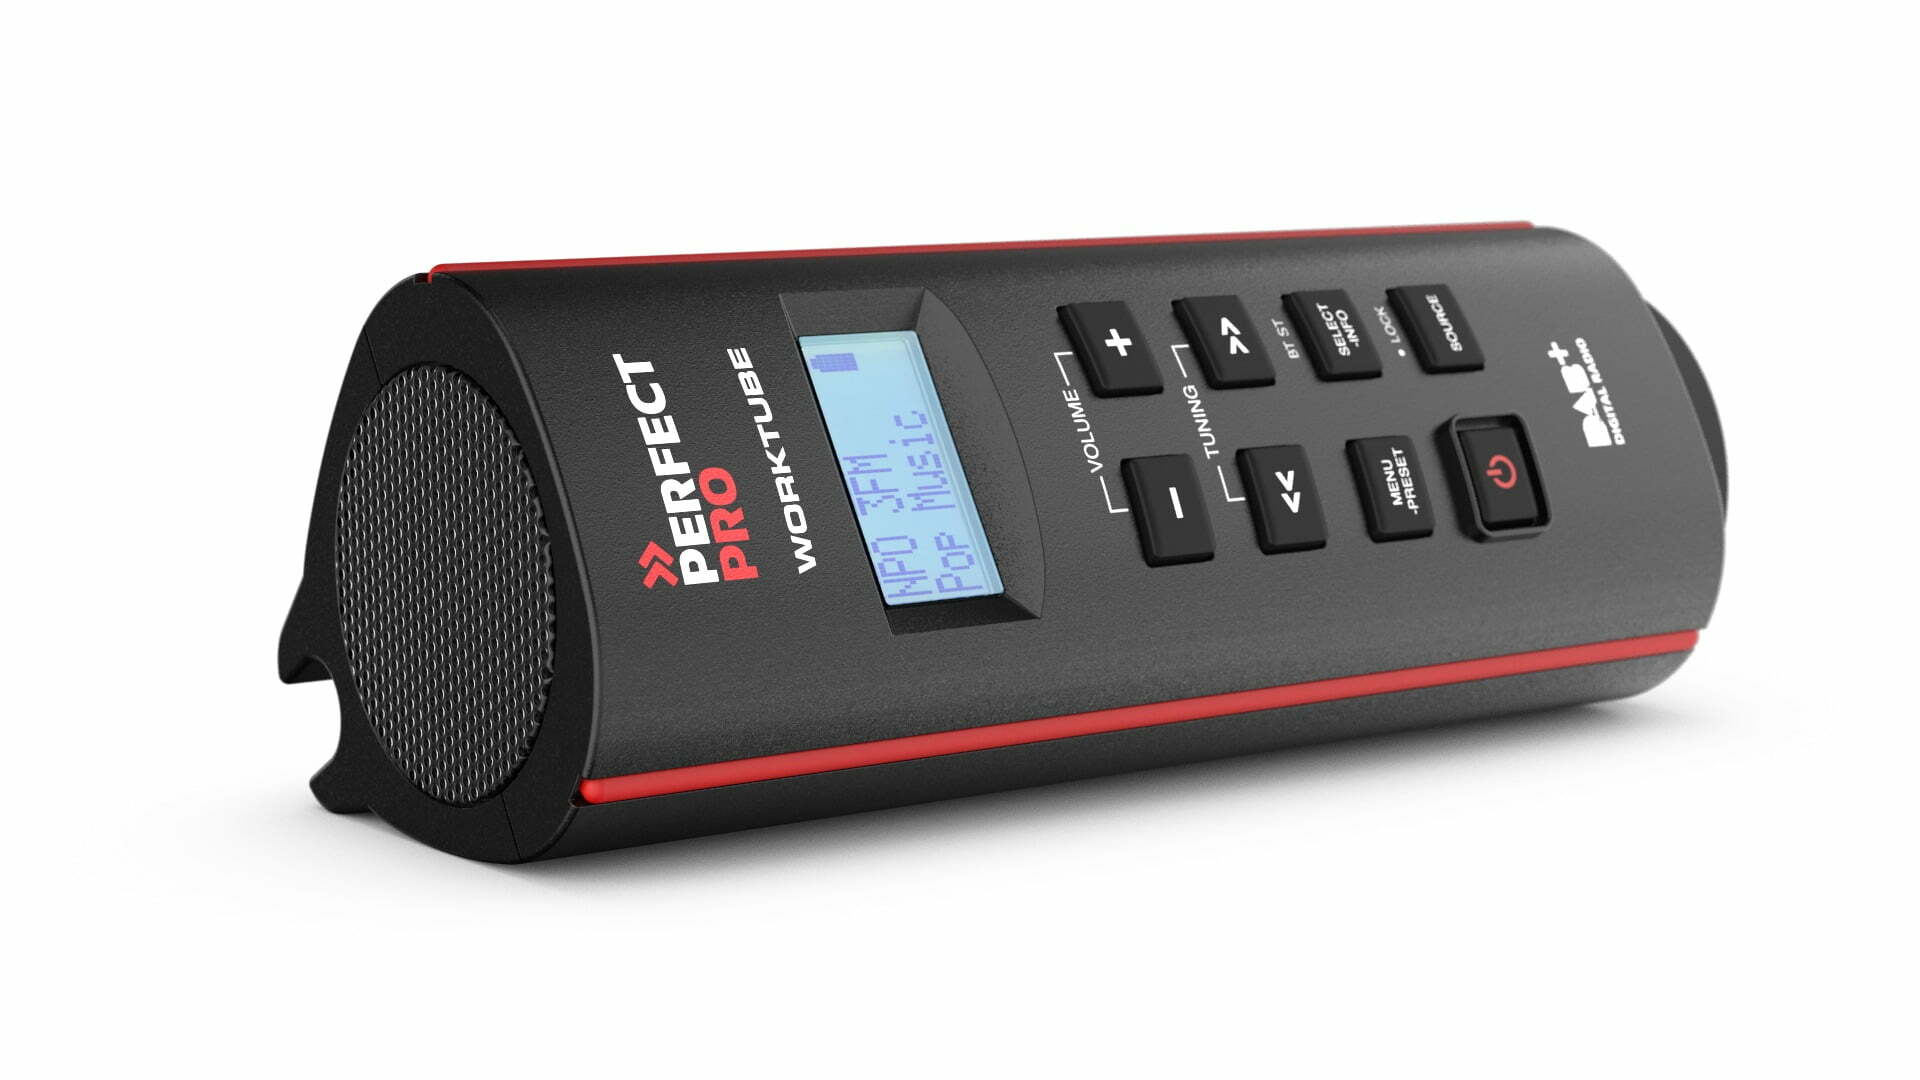 PerfectPro brings the first radio with radio pairing function onto the market